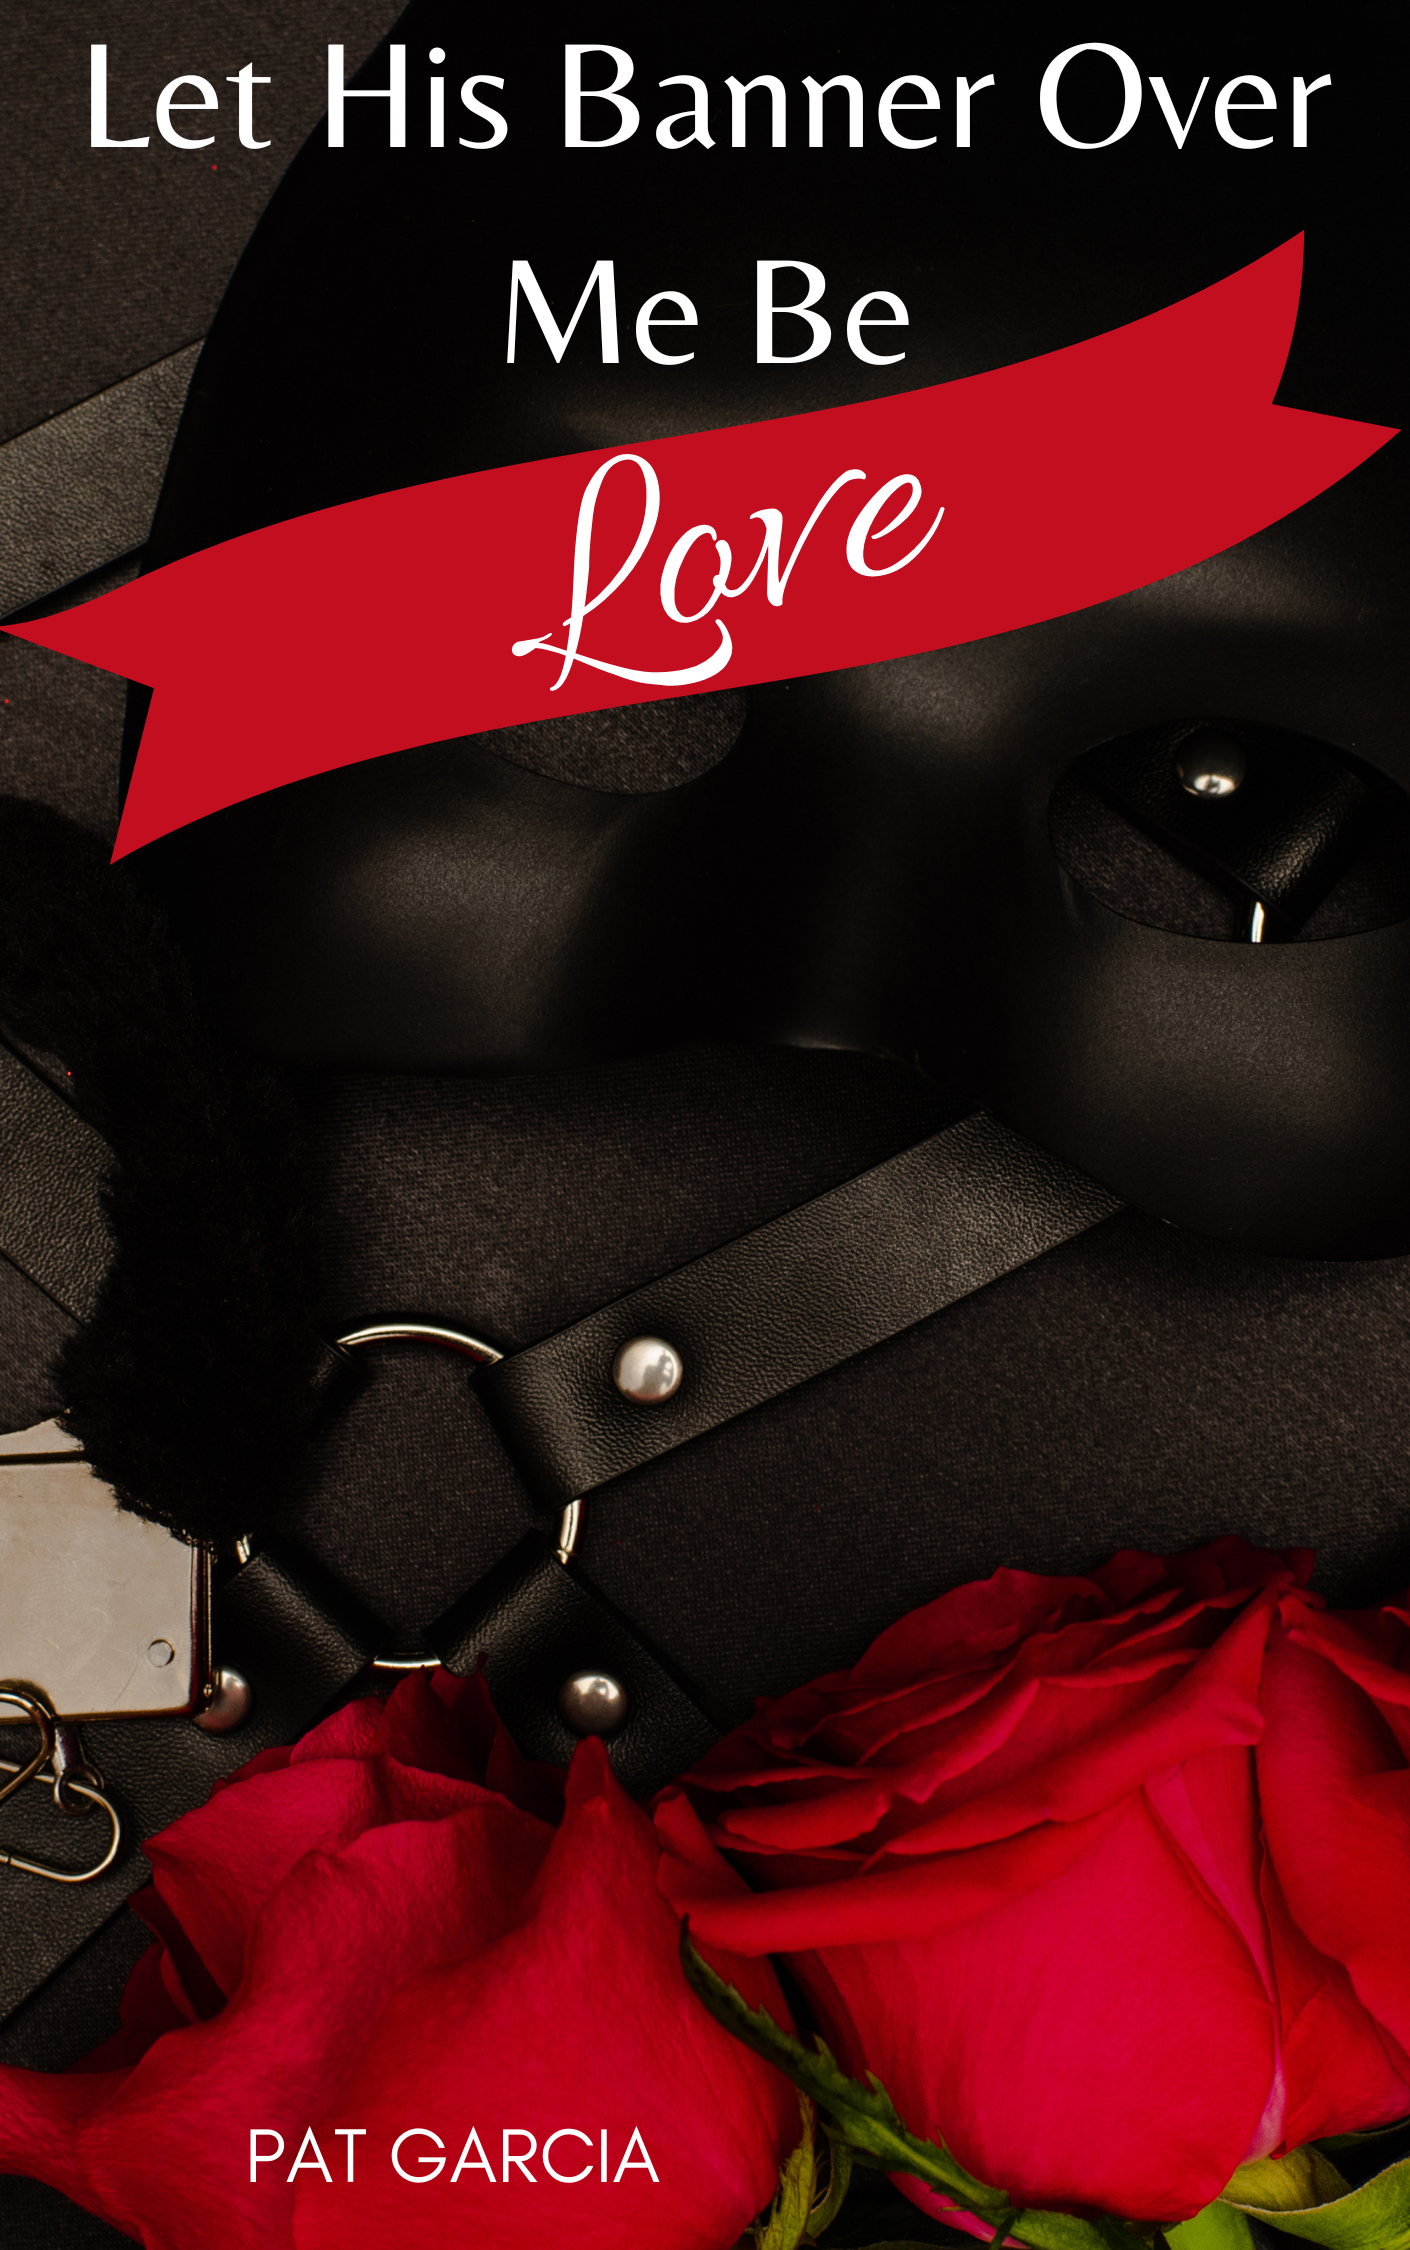 Let His Banner Over Me Be Love .png 1410 x 2250